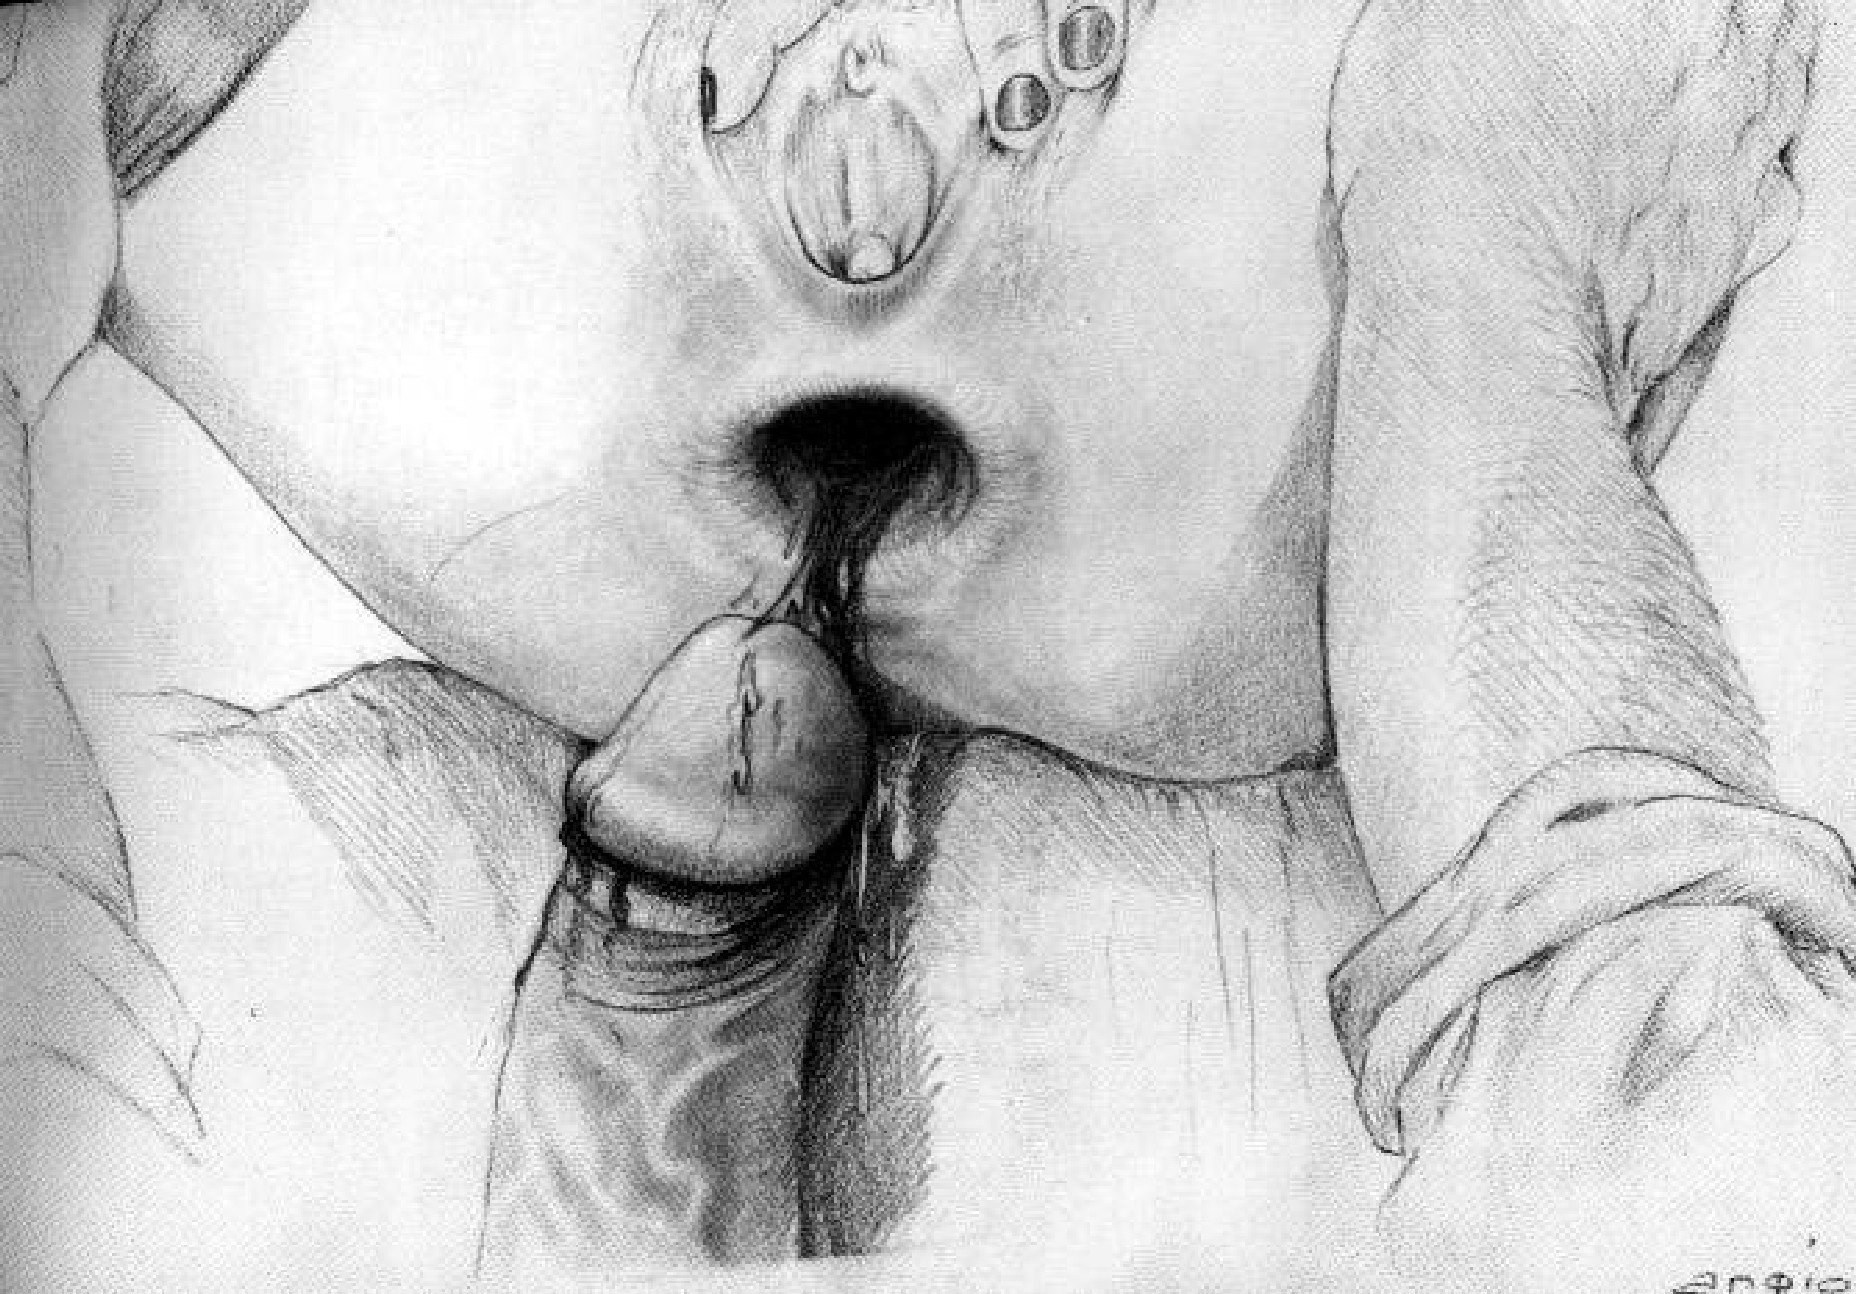 Real Anal Sex Drawings - ANAL PORN PENCILS (36 photos) - sex eporner pics